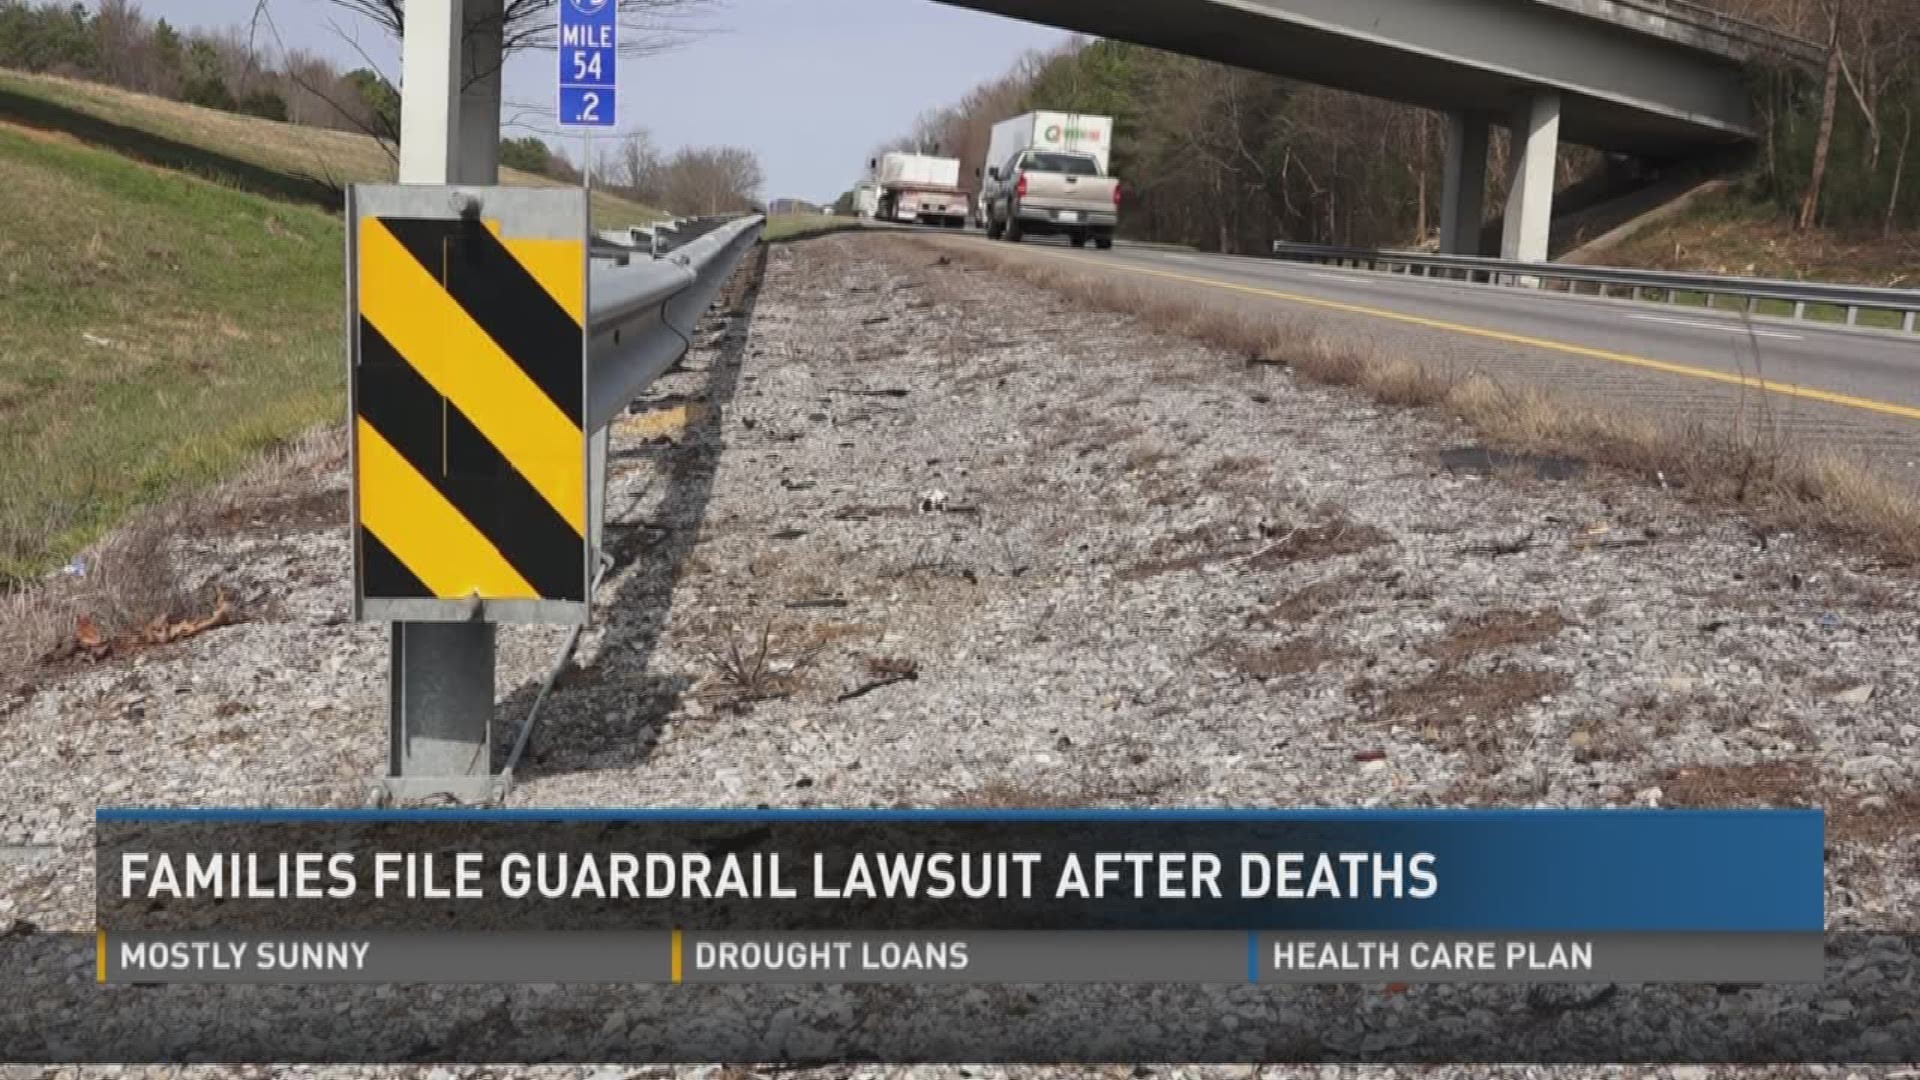 The families of several people killed in crashes involved in an type of guardrail deemed unsafe are demanding action in D.C.